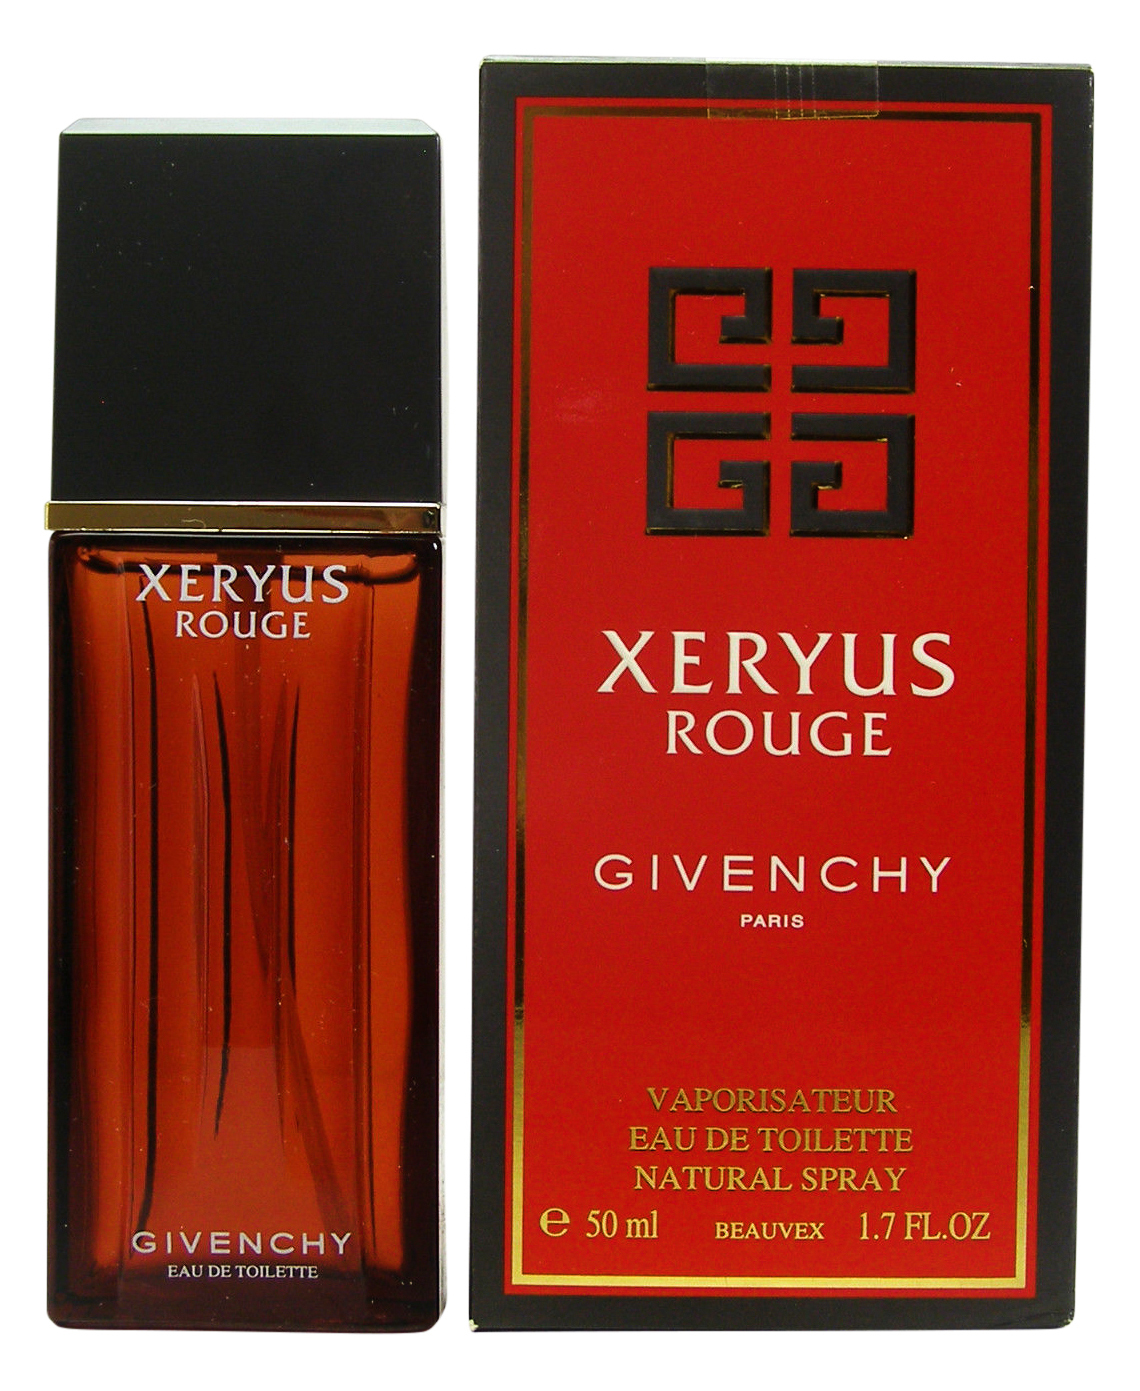 xeryus by givenchy